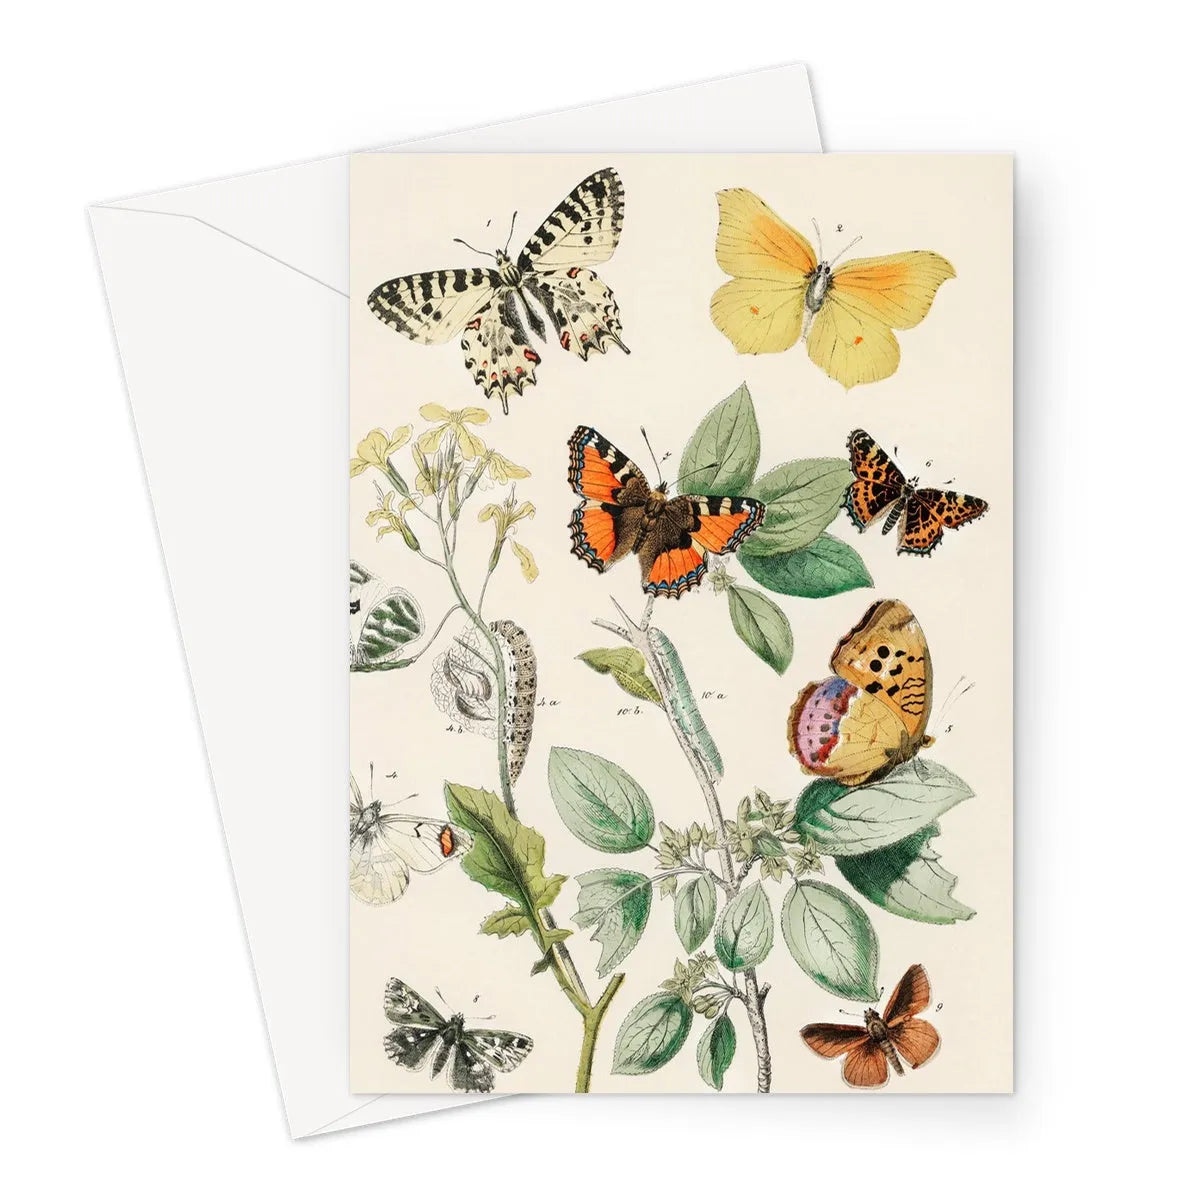 European Butterflies And Moths 3 By William Forsell Kirby Greeting Card - A5 Portrait / 1 Card - Notebooks & Notepads